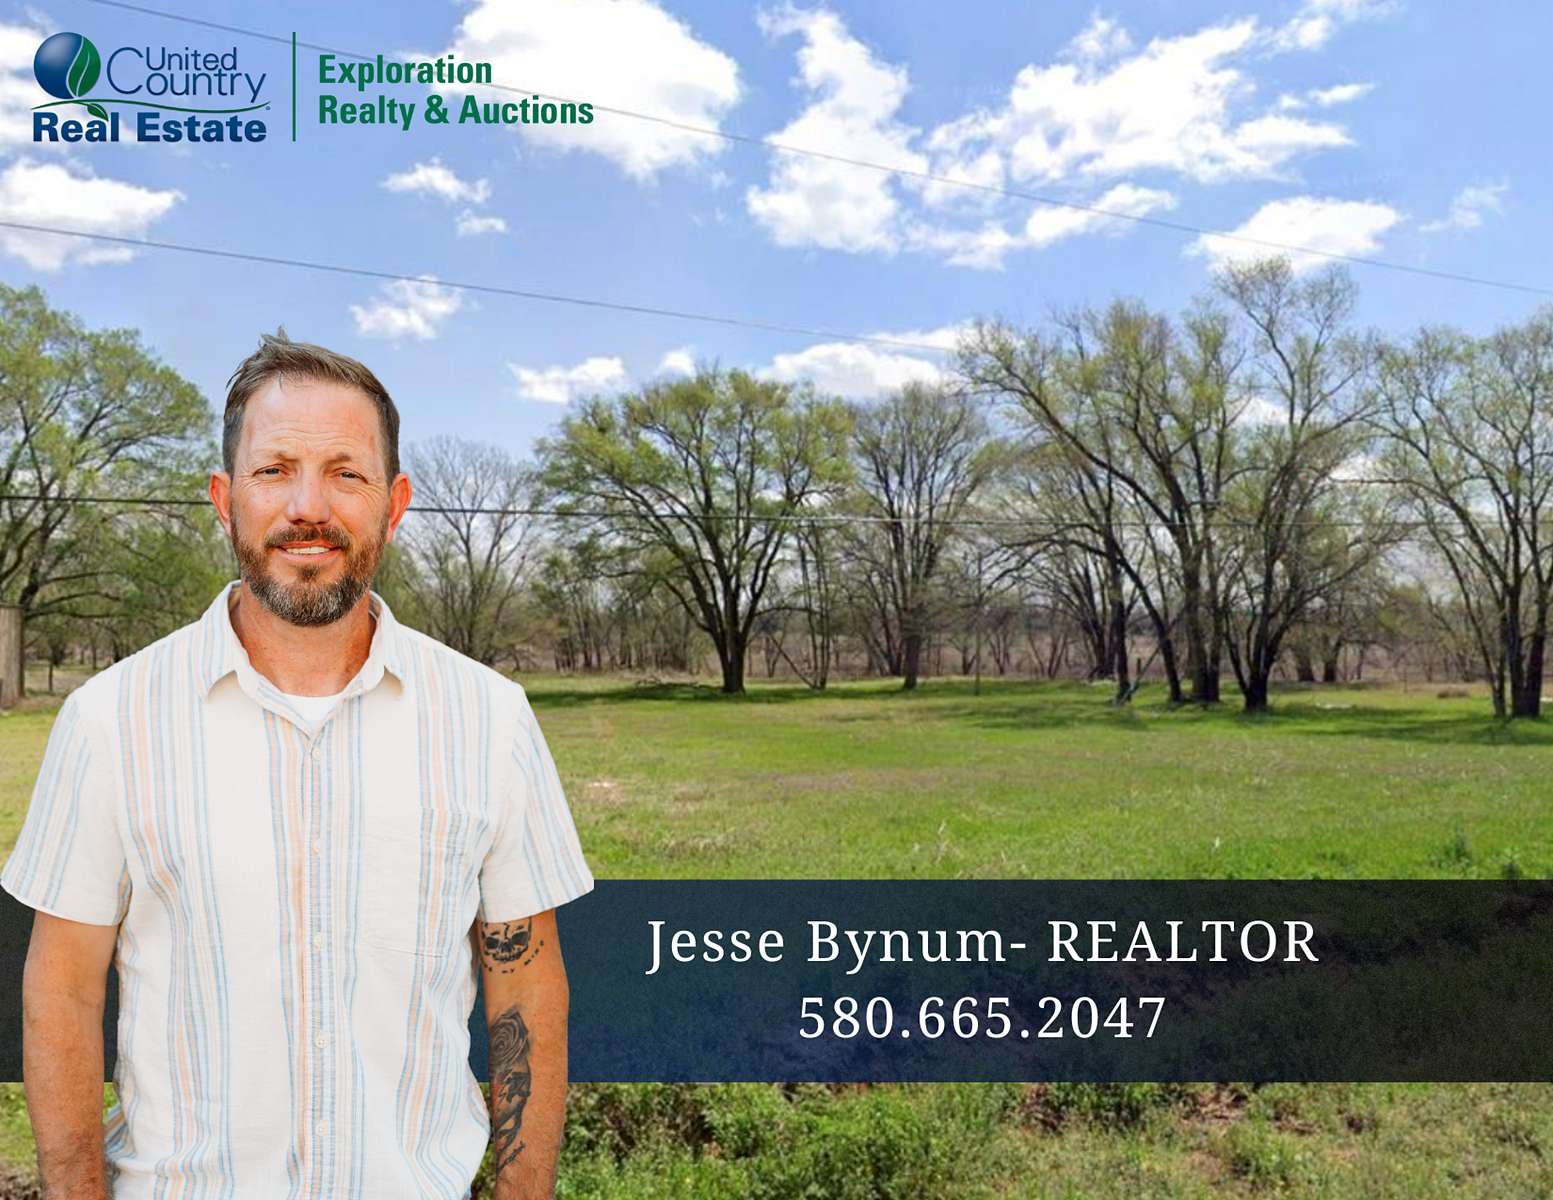 3 Acres of Recreational Land & Farm for Sale in Sayre, Oklahoma